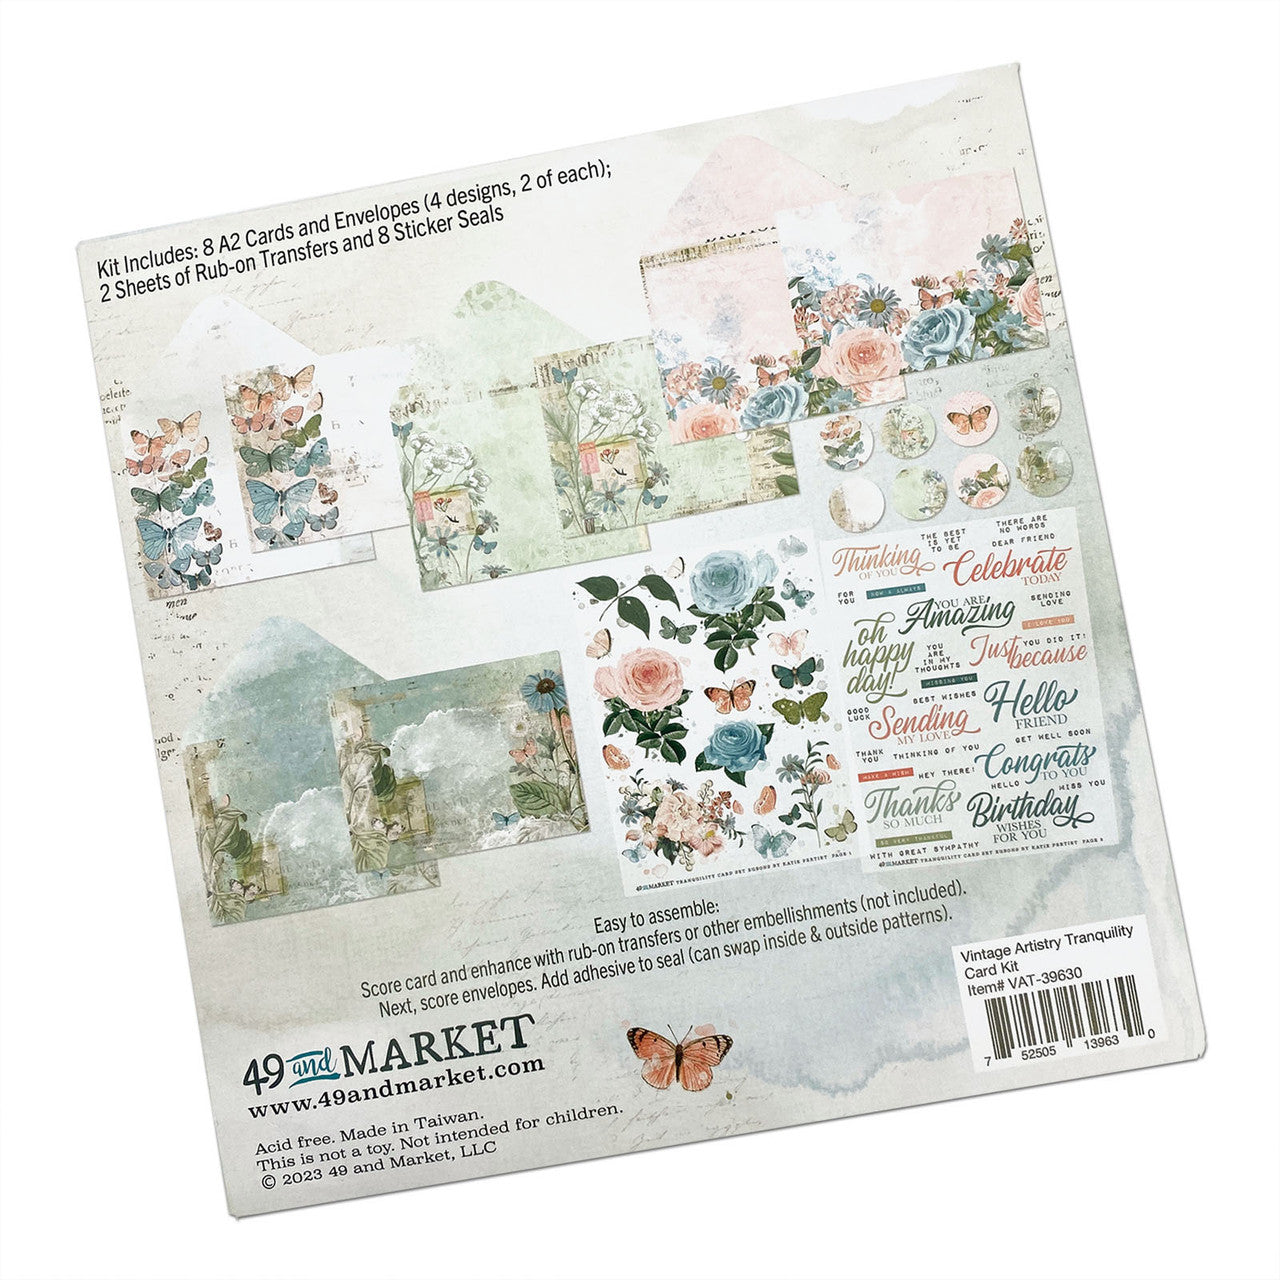 49 and Market Vintage Artistry Tranquility Card Kit